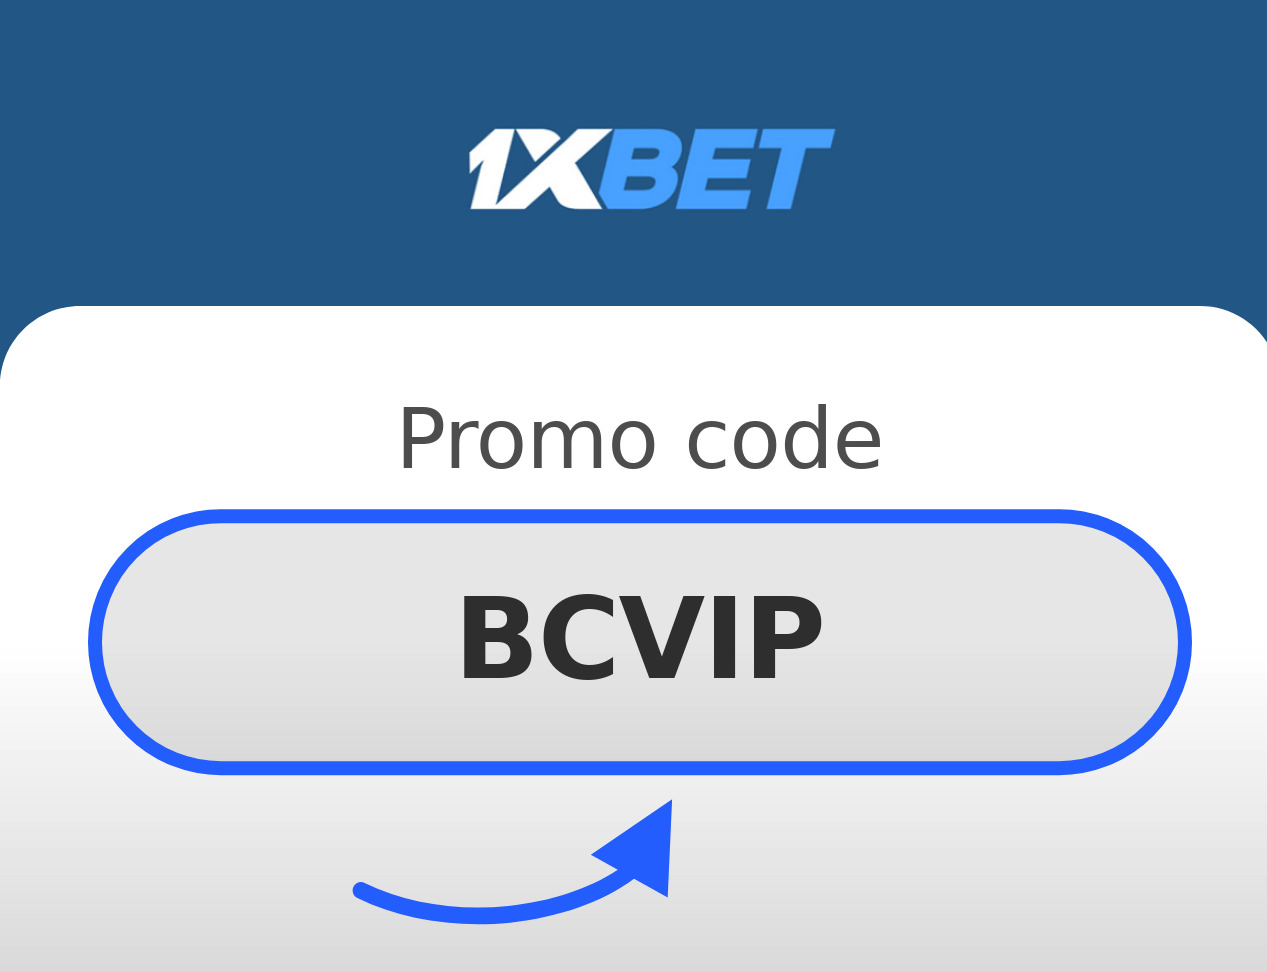 How To Get 1xbet Promo Code In Nigeria